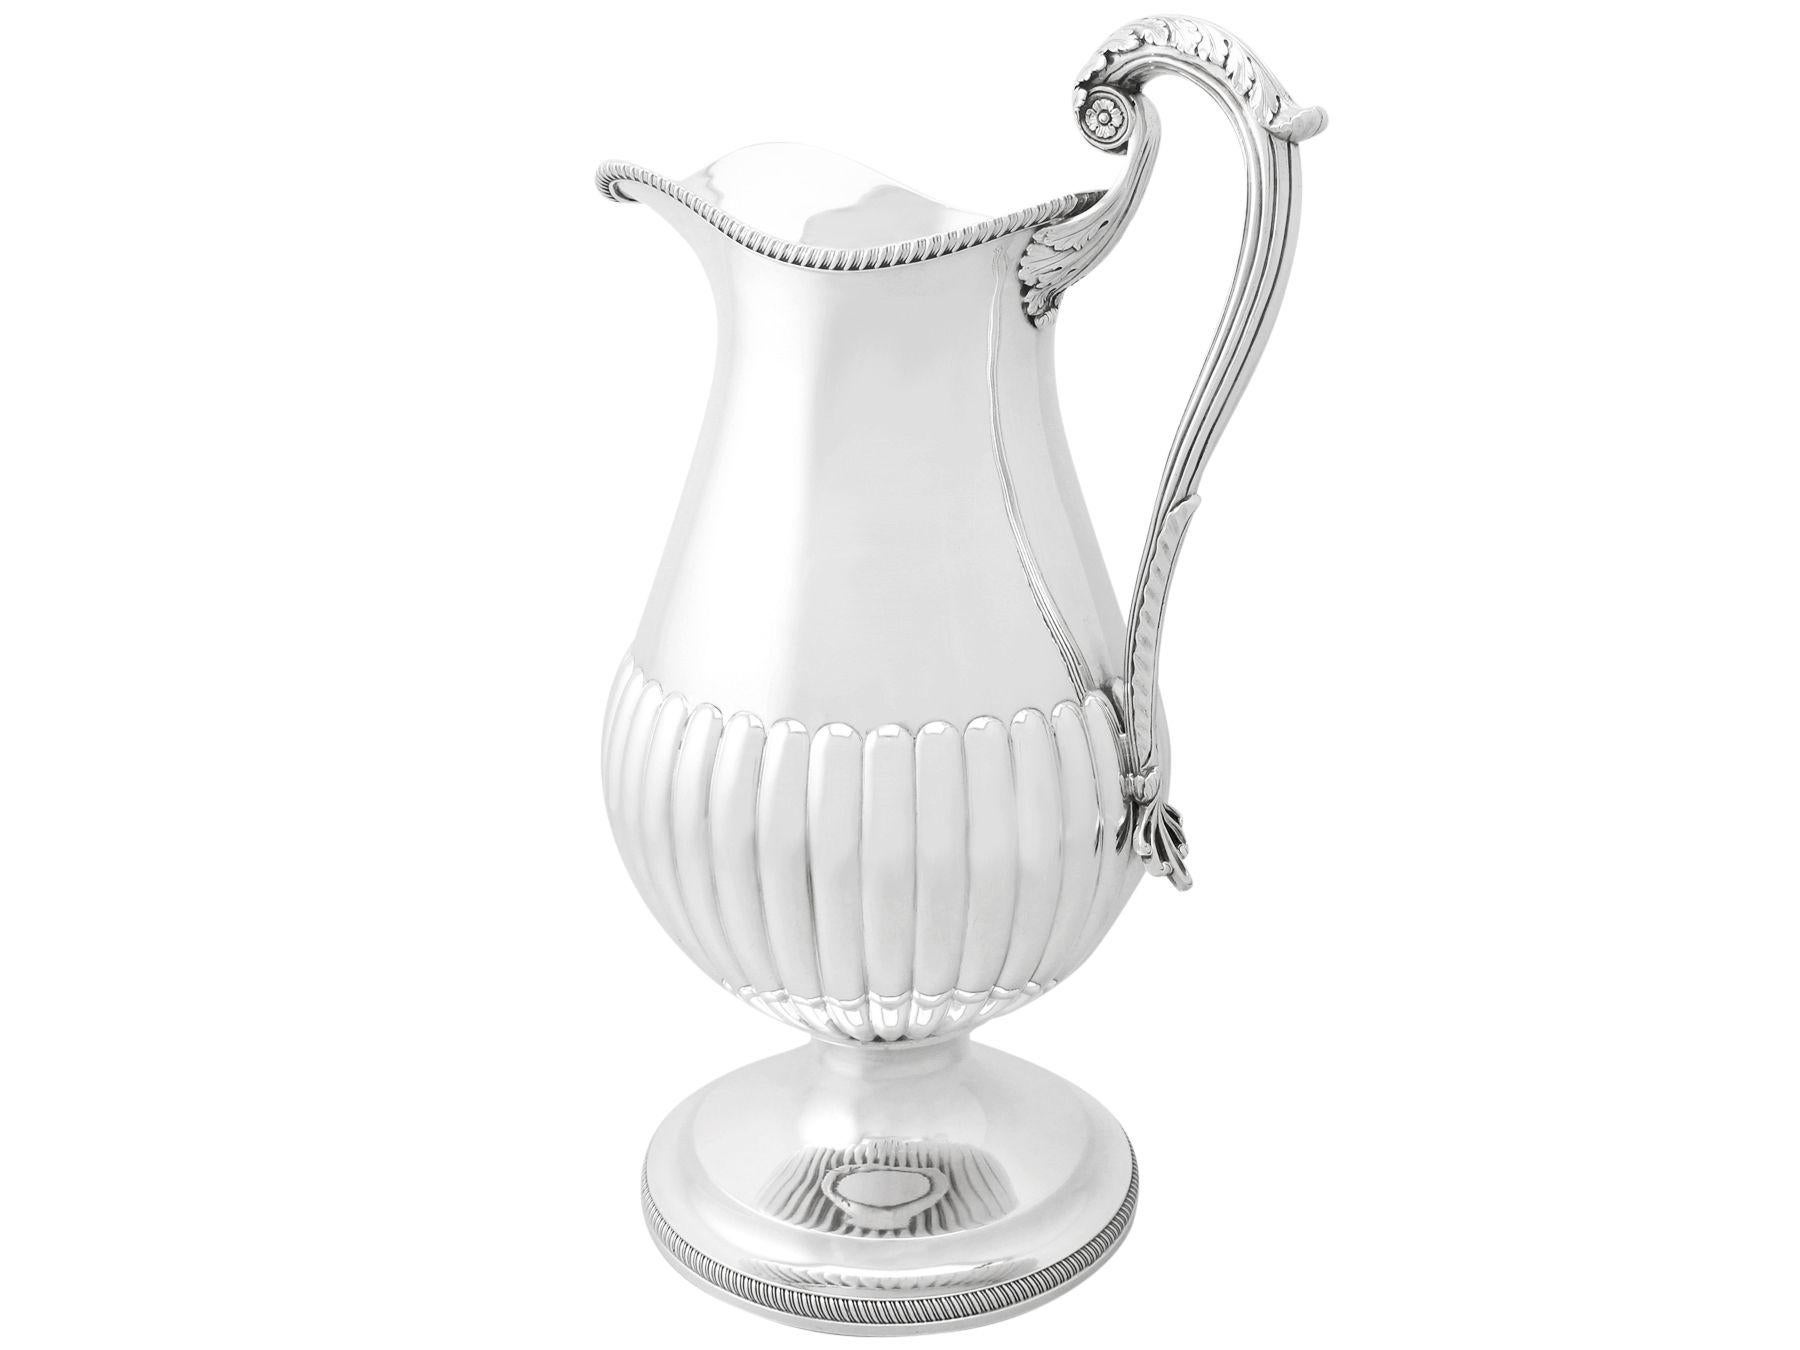 19th Century Antique George IV 1815 Sterling Silver Wine Ewer or Flagon In Excellent Condition For Sale In Jesmond, Newcastle Upon Tyne